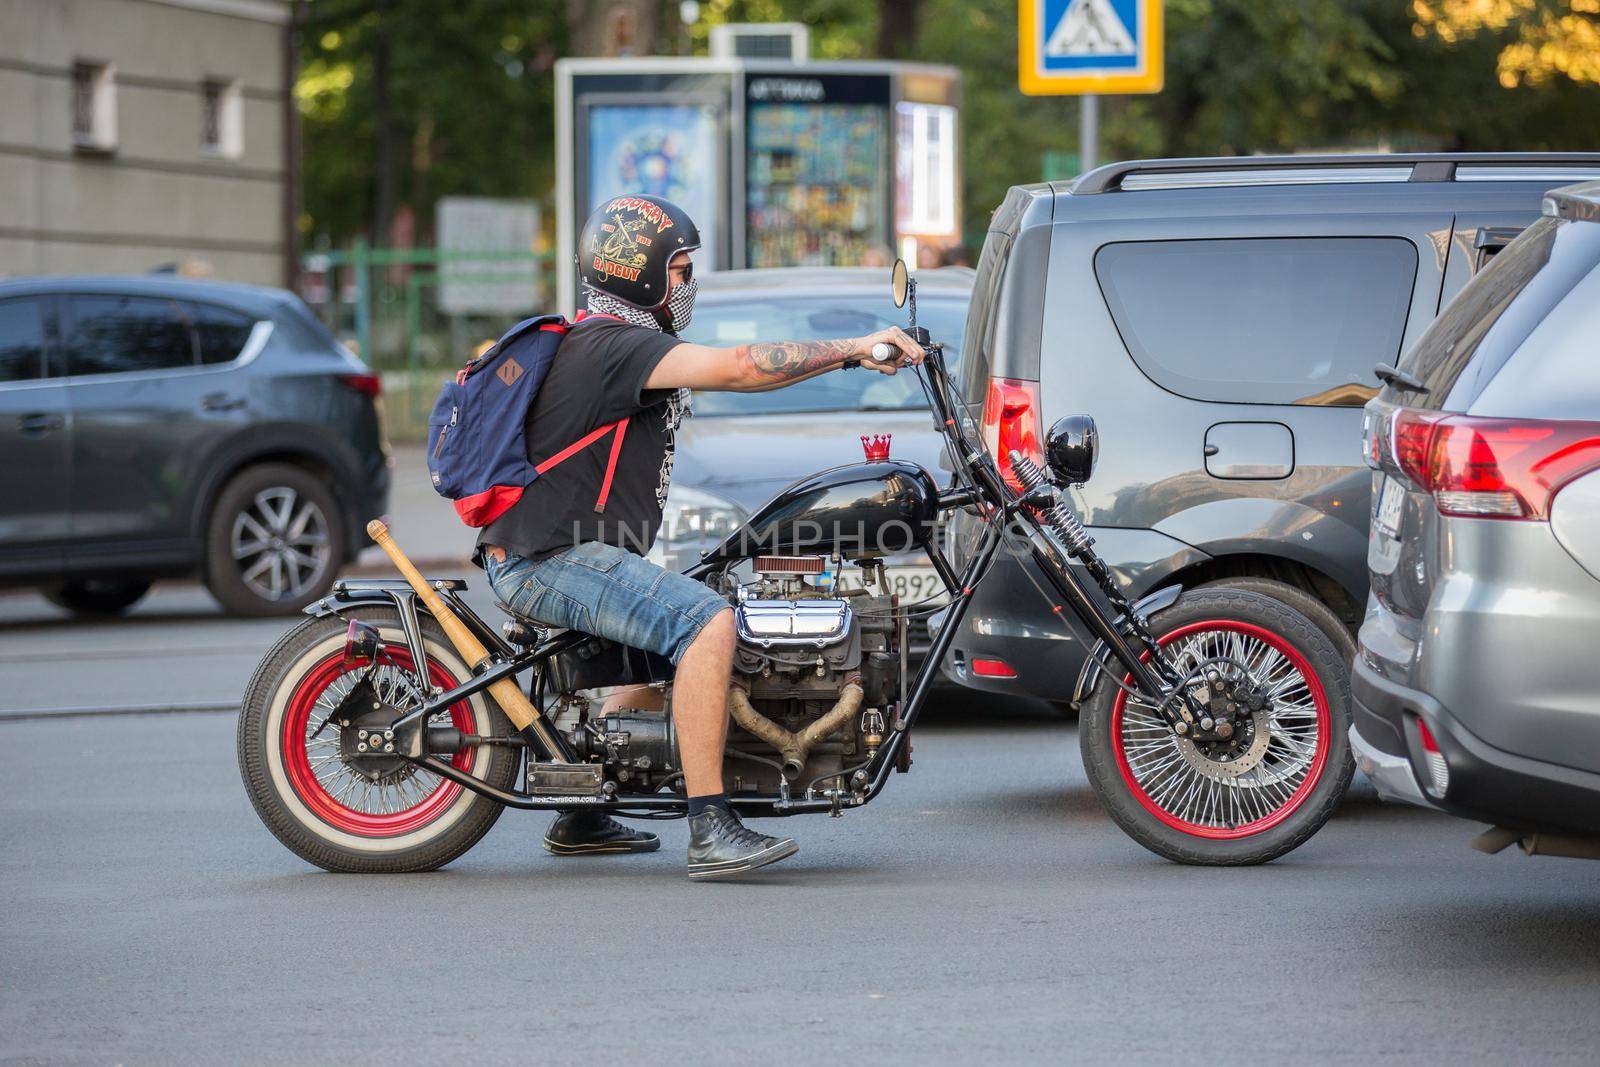 Ukraine. The city of Kharkov. September 10, 2019. Biker on a motorcycle in the city center. by Yurii73